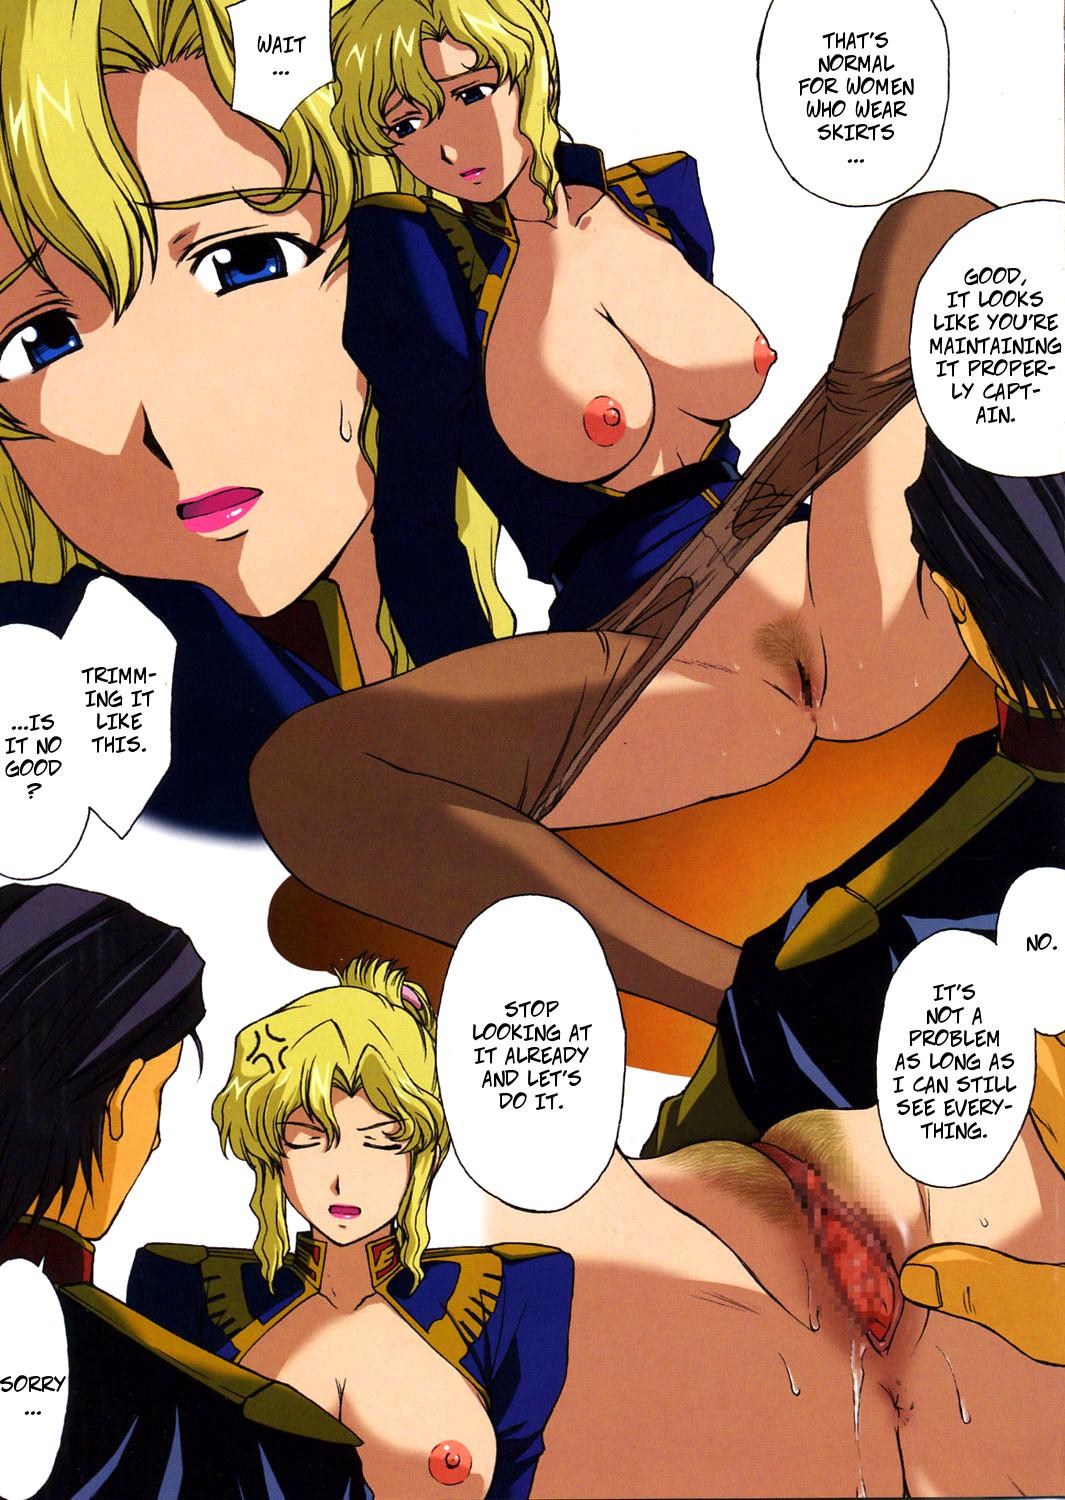 Thylinh ZEON Lost War Chronicles - Mobile suit gundam lost war chronicles Best Blowjob - Page 8